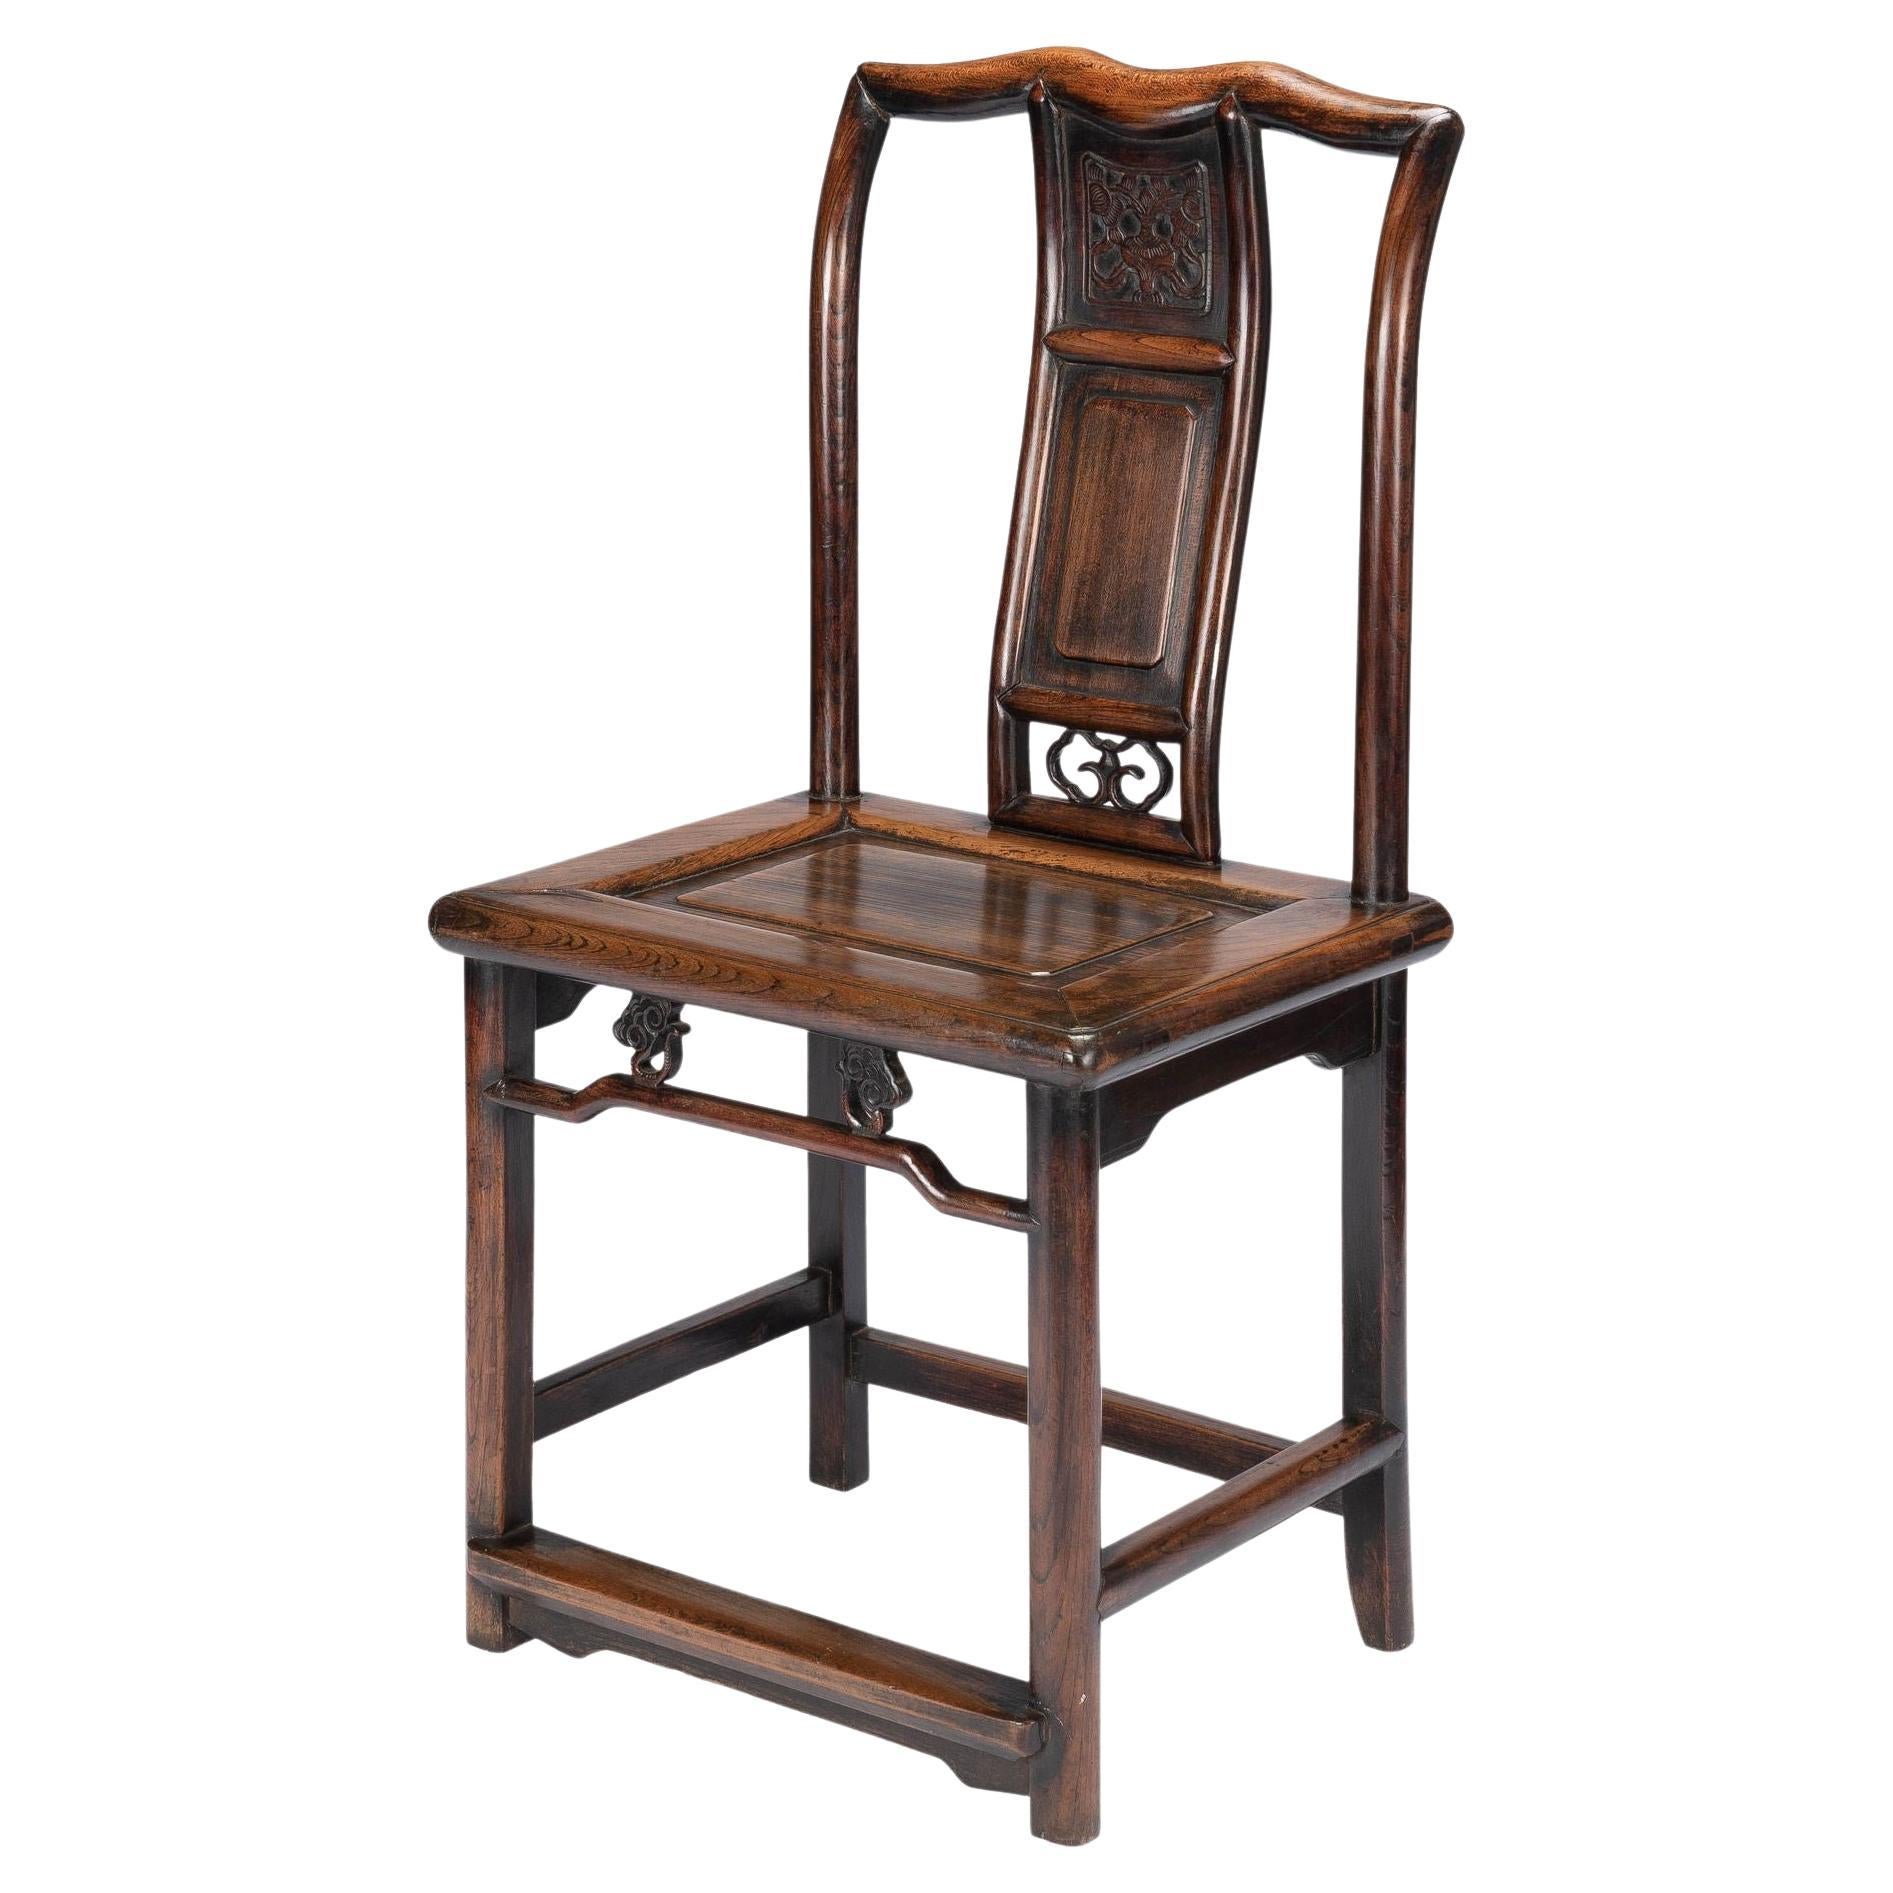 Chinese Elm Audience Chair, c. 1850